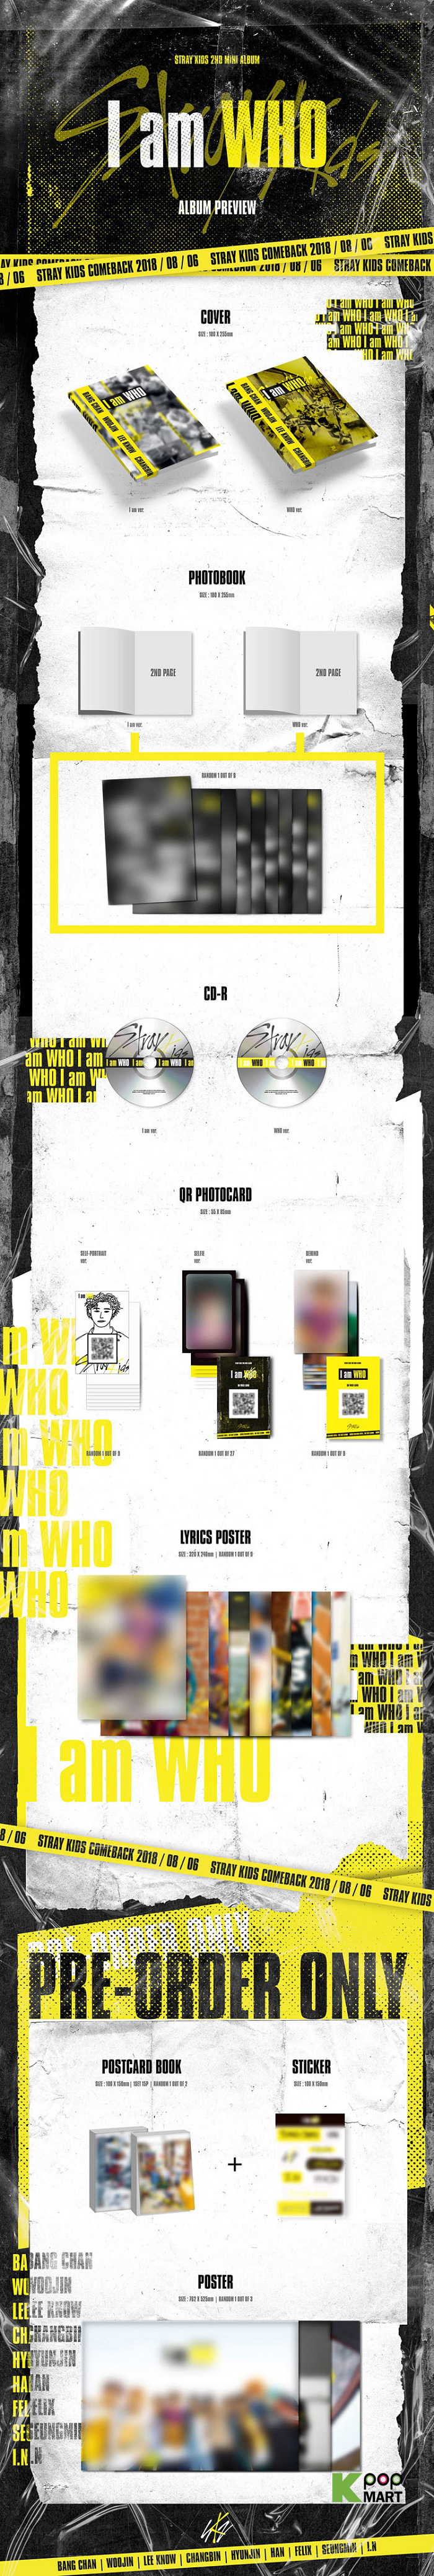 Who Version Stray Kids I am Who 2nd Mini Album CD+Photobook+3 QR Photocards+Lyrics Poster+ Extra 4 Photocards and 1 Double-Sided Photocard